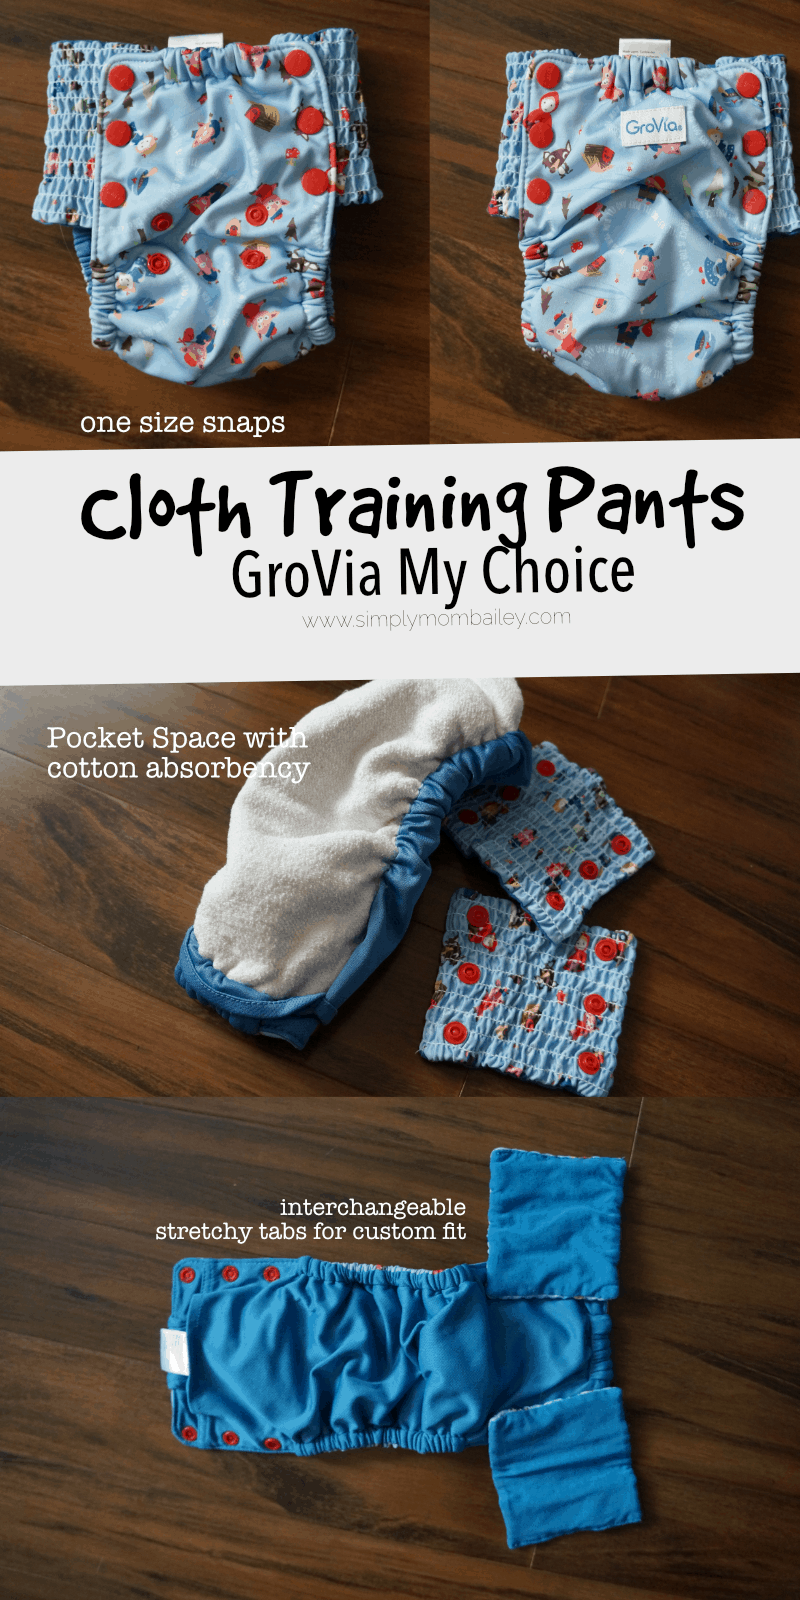 GroVia My Choice Cloth Trainers for Potty Training - Training Pants - Training Underwear for Toddlers - Potty Training - Potty Learning - Cloth Diapers